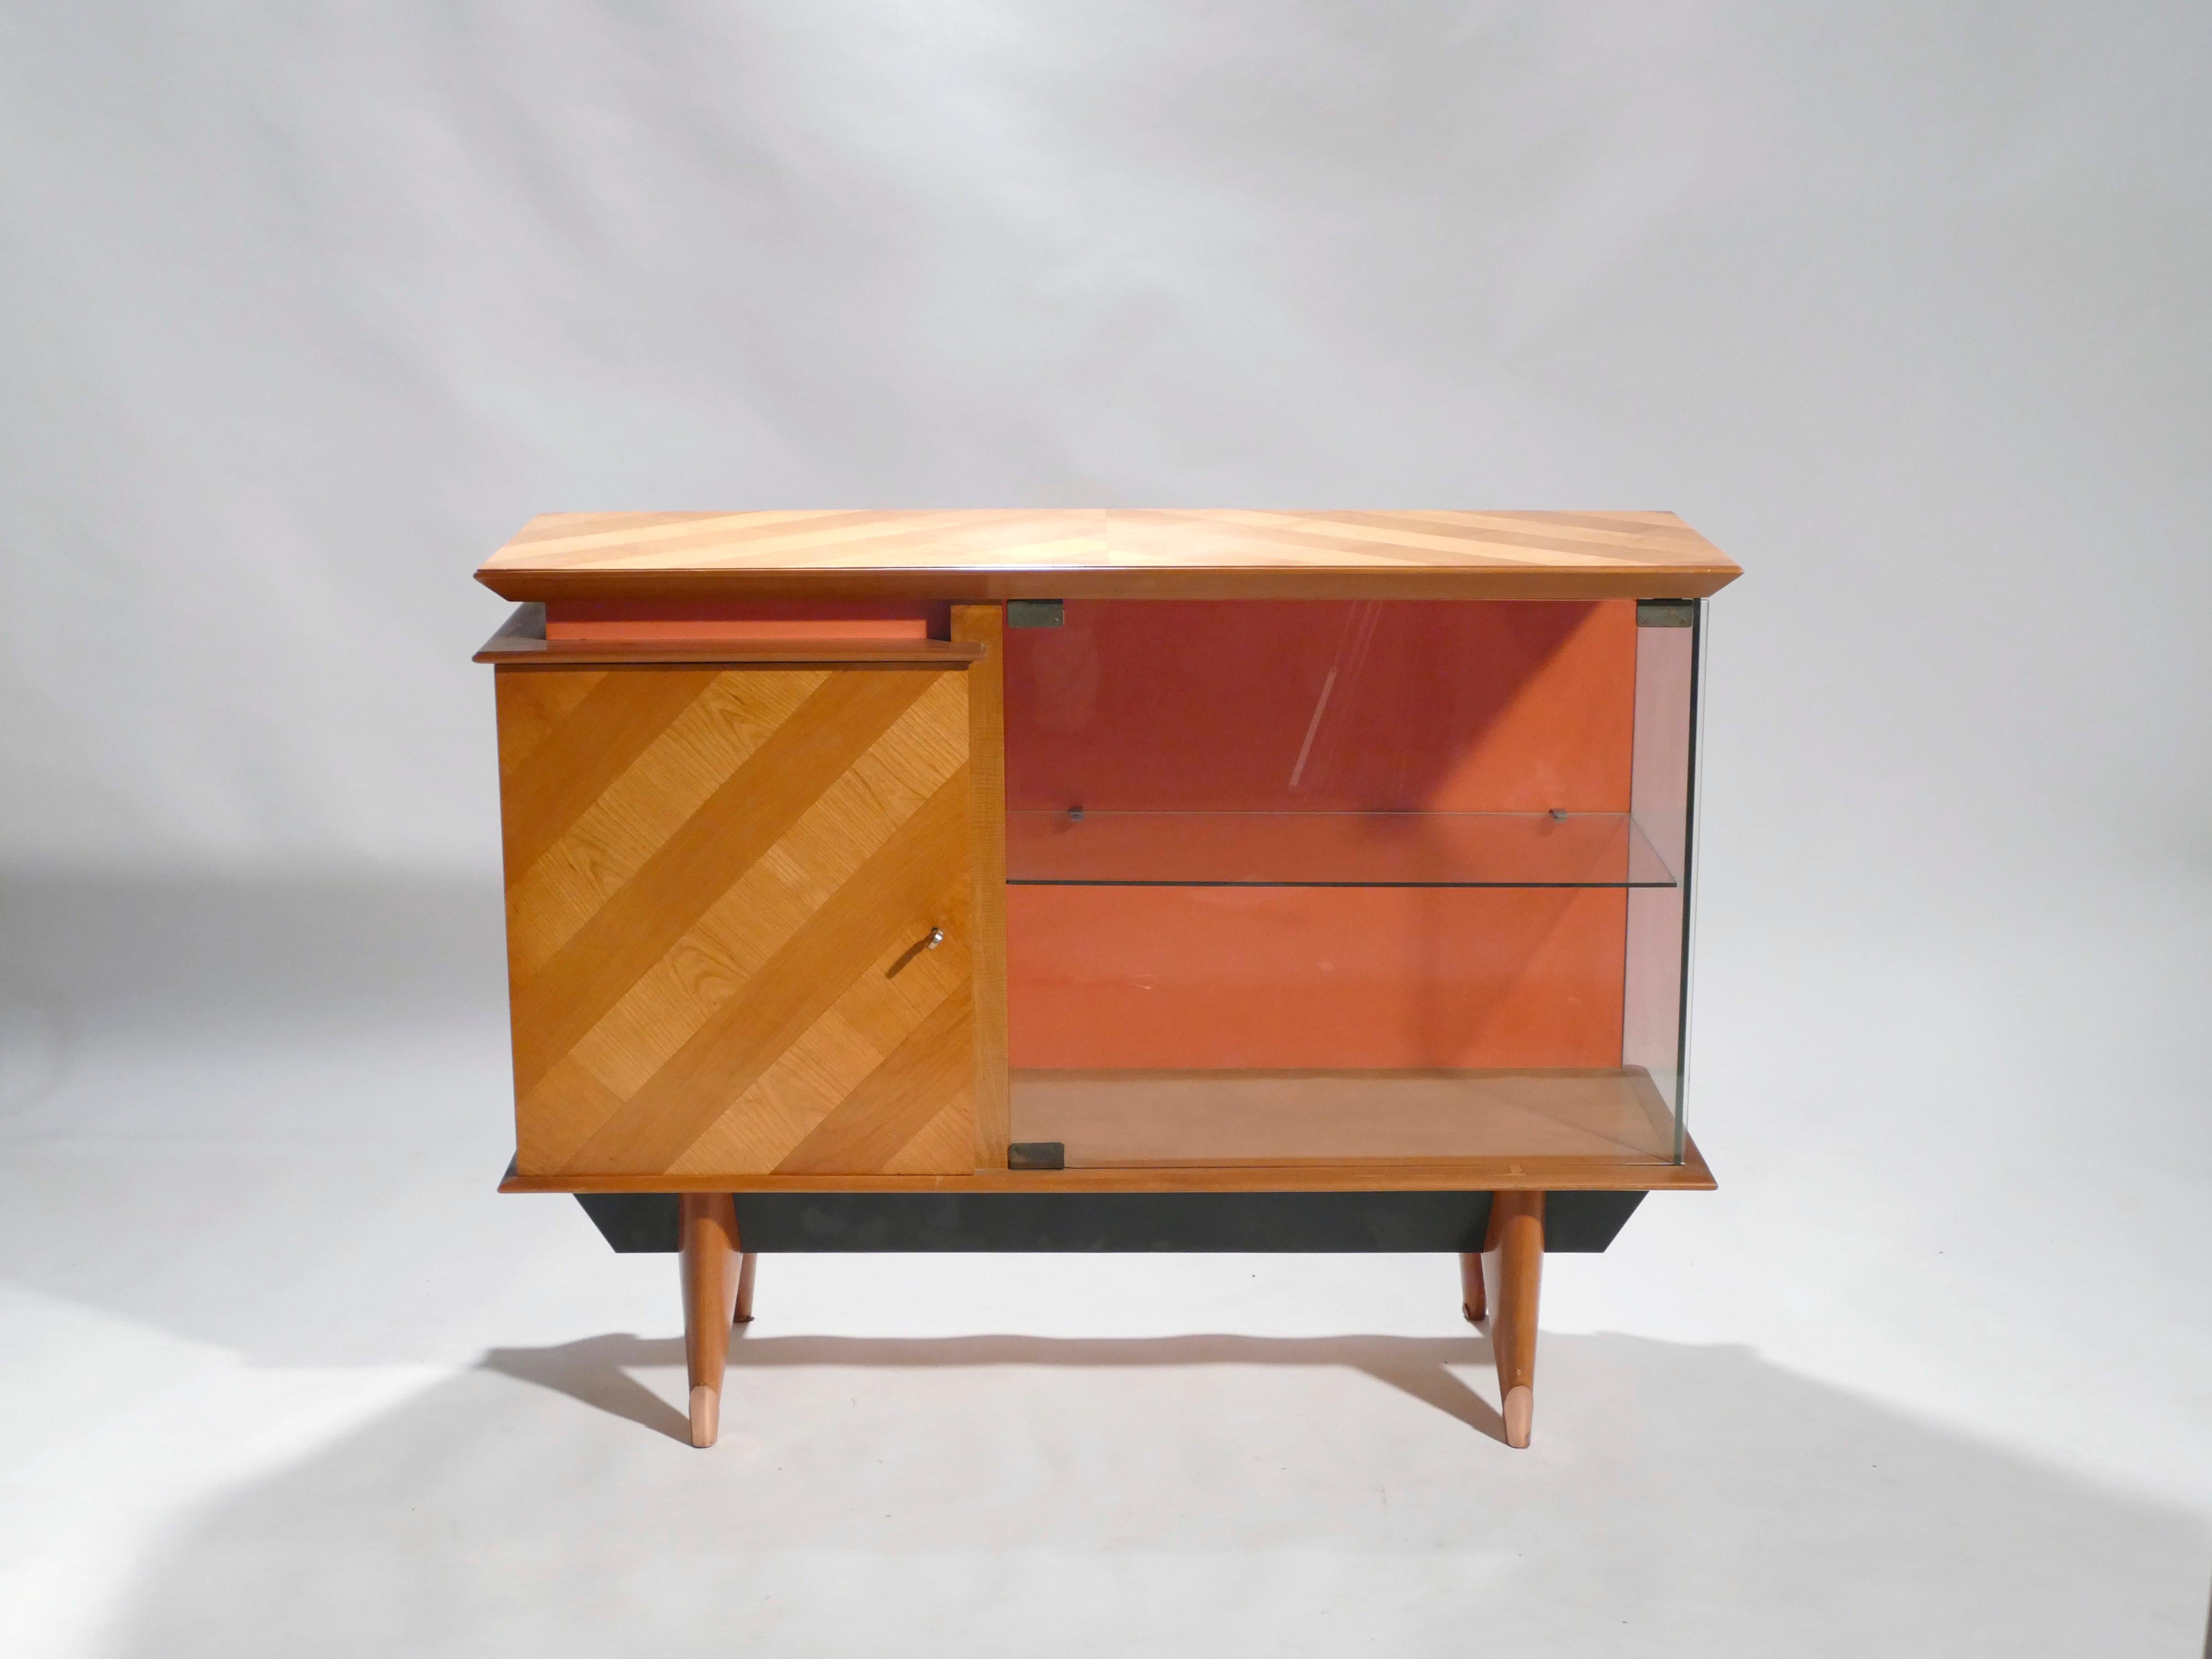 Warm light brown oak and rich copper form a beautiful color palette in this cabinet vaisselier from the 1950s. On the front and top of the cabinet, the oak displays a striped lightwood/dark wood pattern that feels fun and very much of the era, while